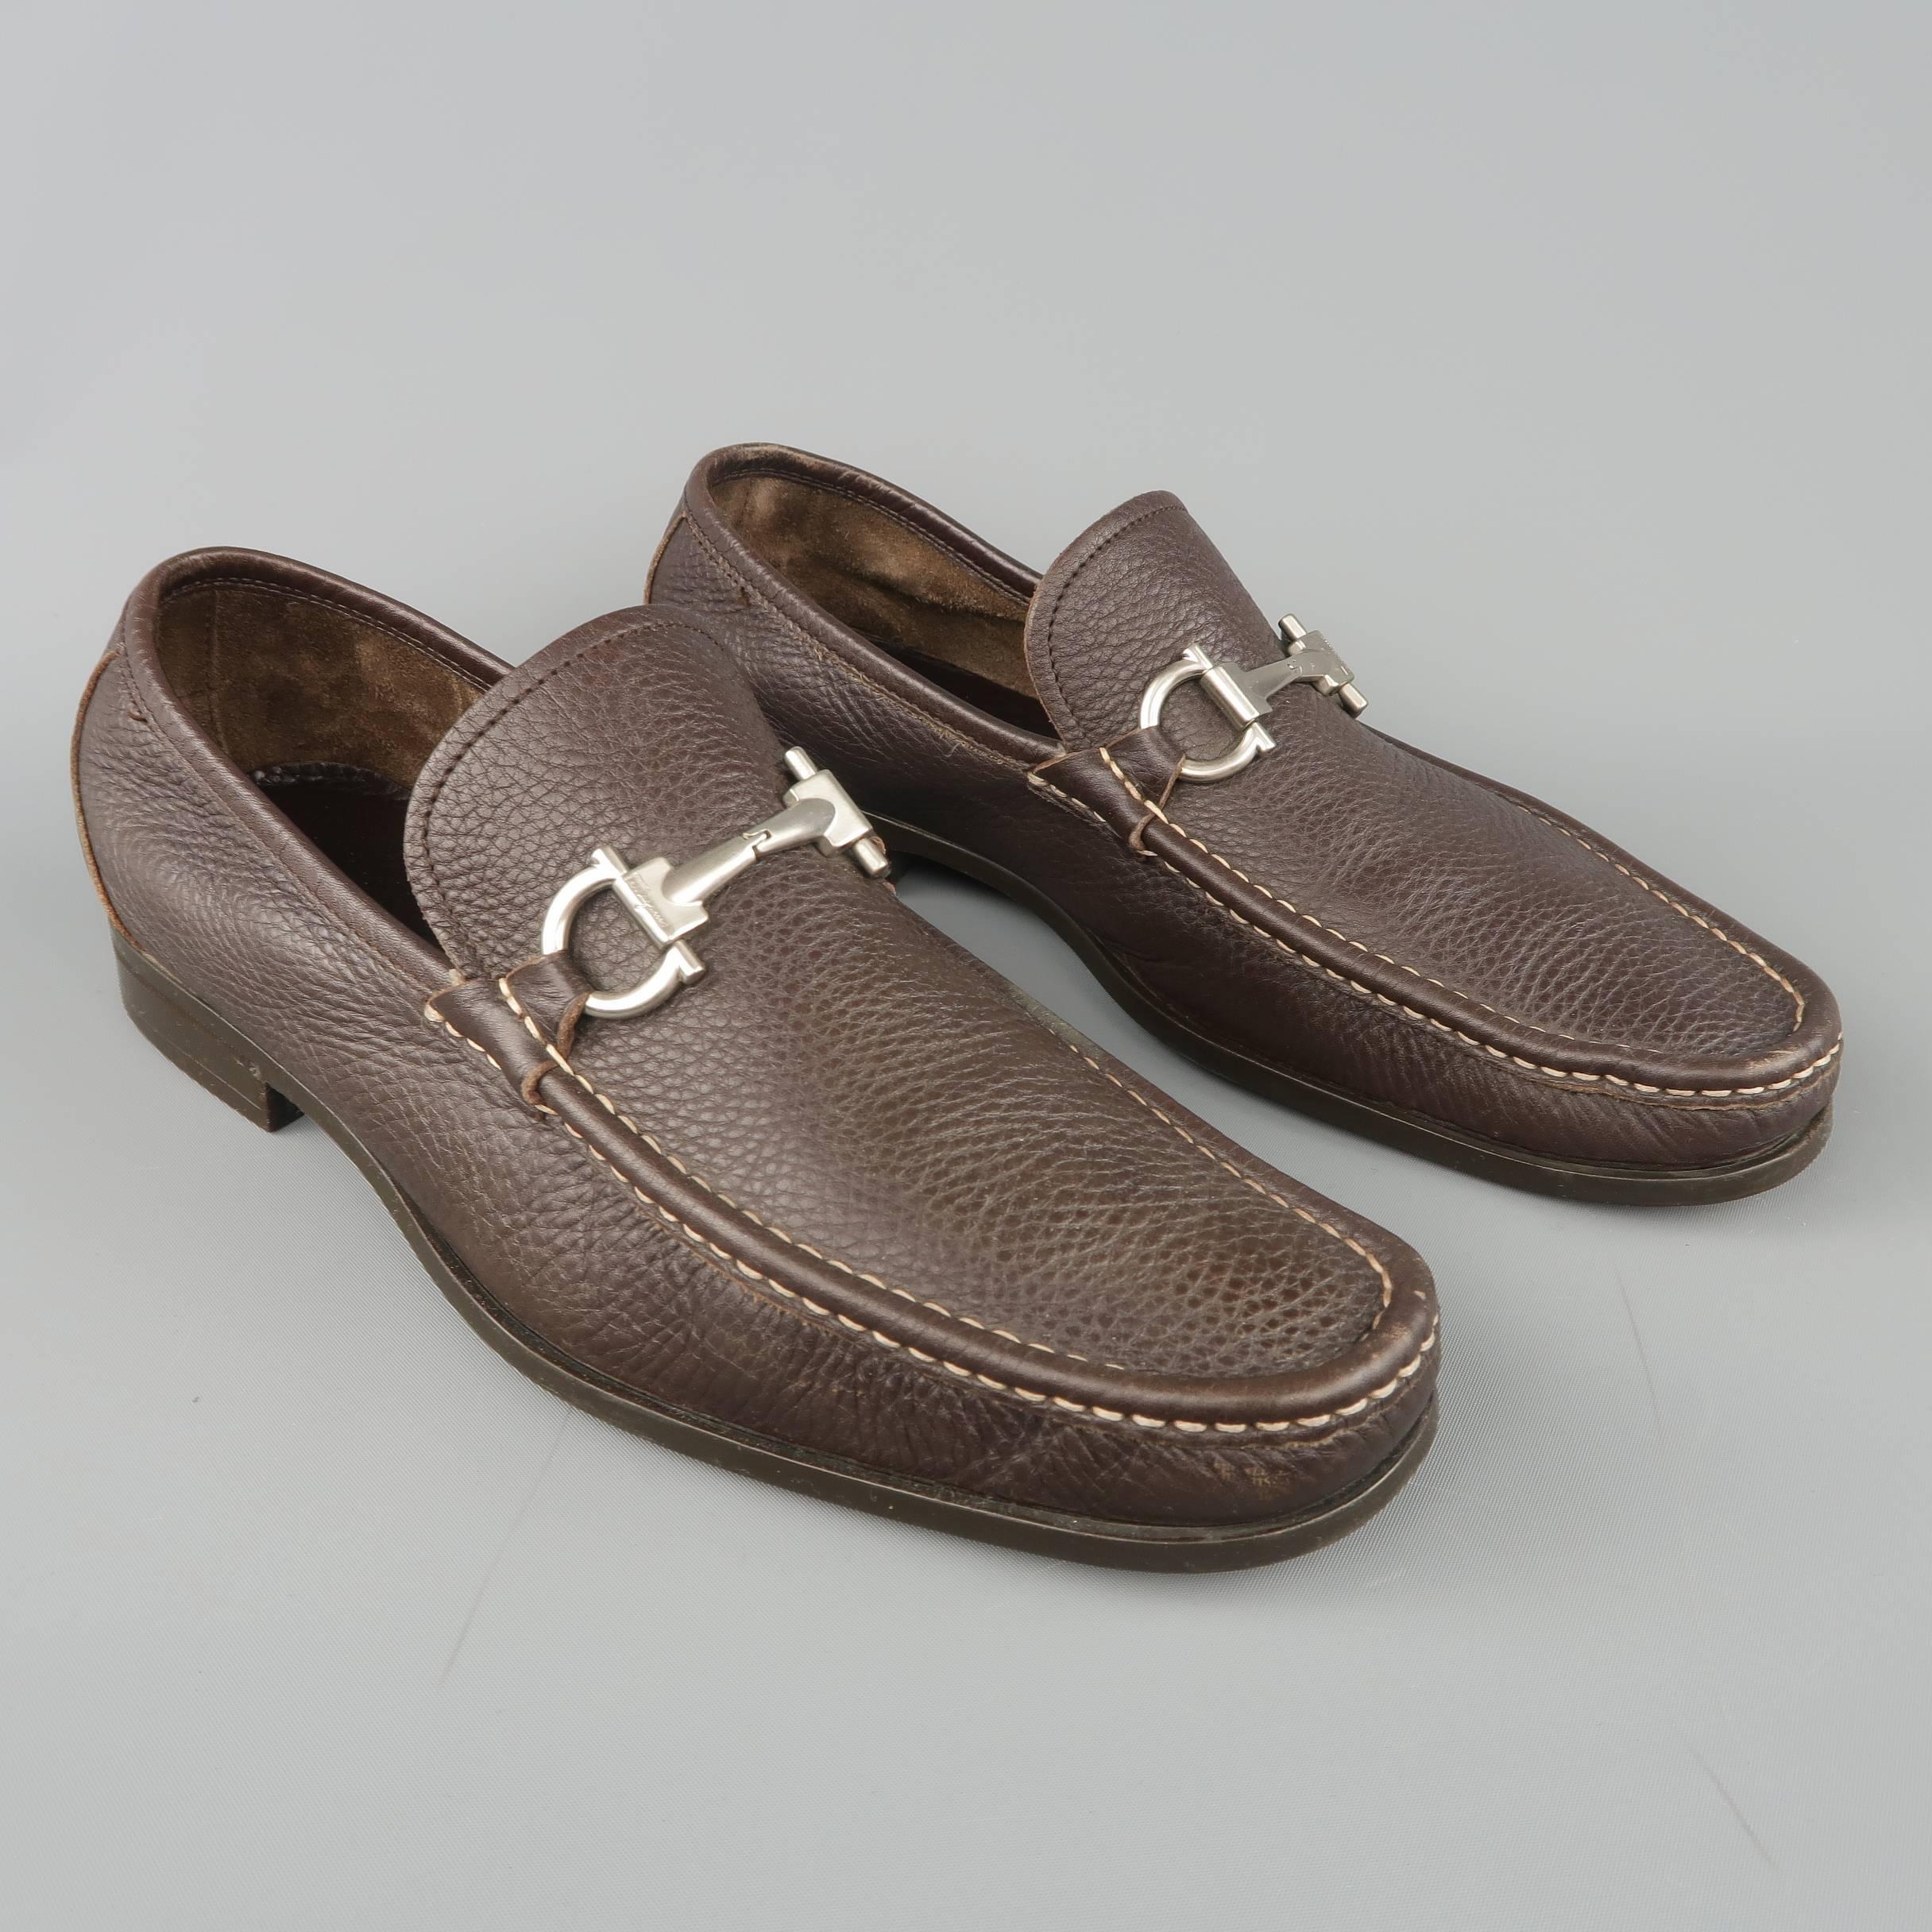 SALVATORE FERRAGAMO dress loafers come in textured brown leather with an apron toe, contrast stitching, and silver tone metal horsebit. Made in Italy.
 
Excellent Pre-Owned Condition.
Marked: UK 10
 
Outsole: 11.65 x 4 in.
